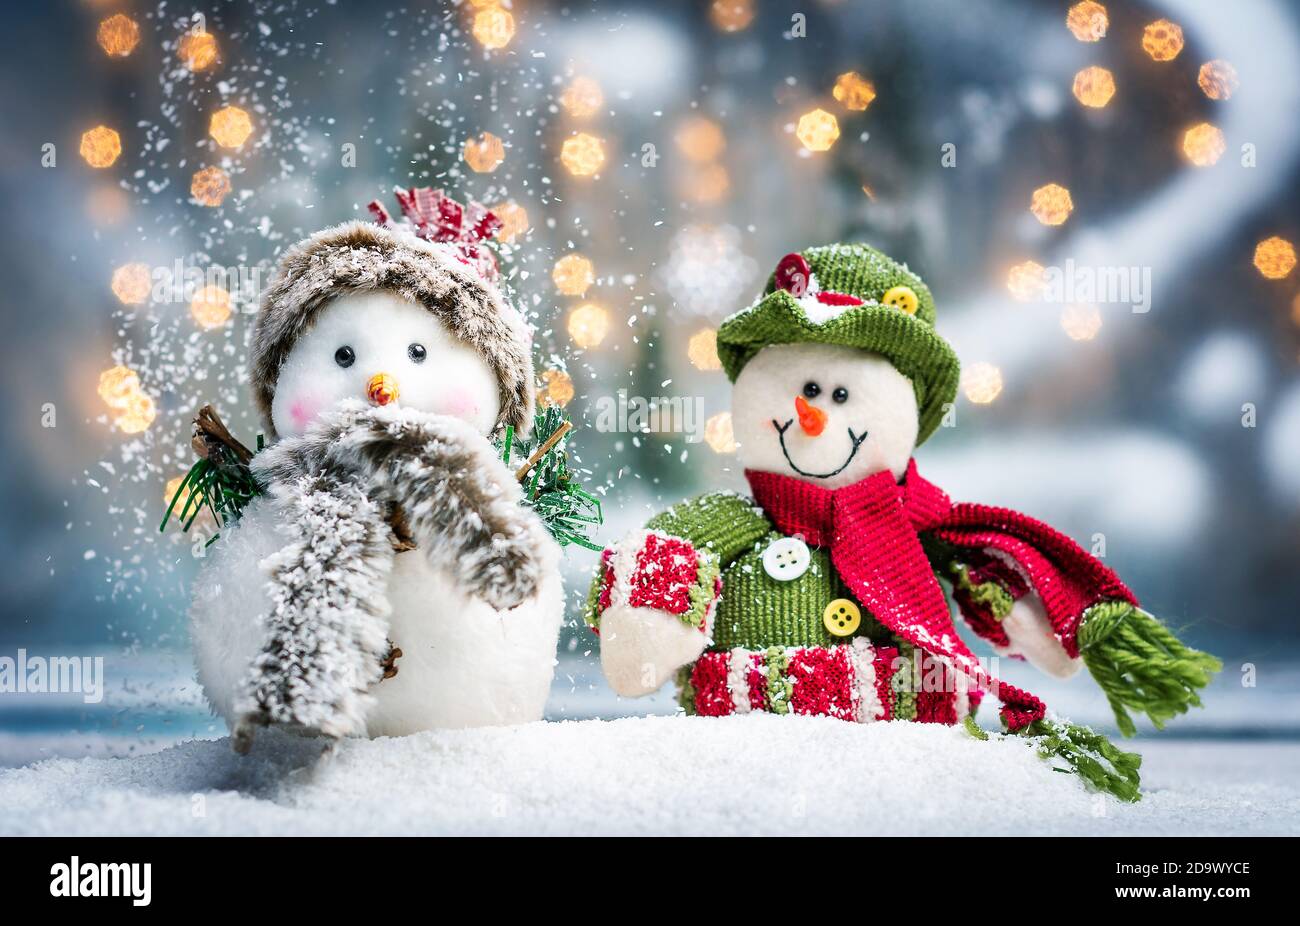 Two snowman with festive illuminated Christmas holiday abstract background Stock Photo